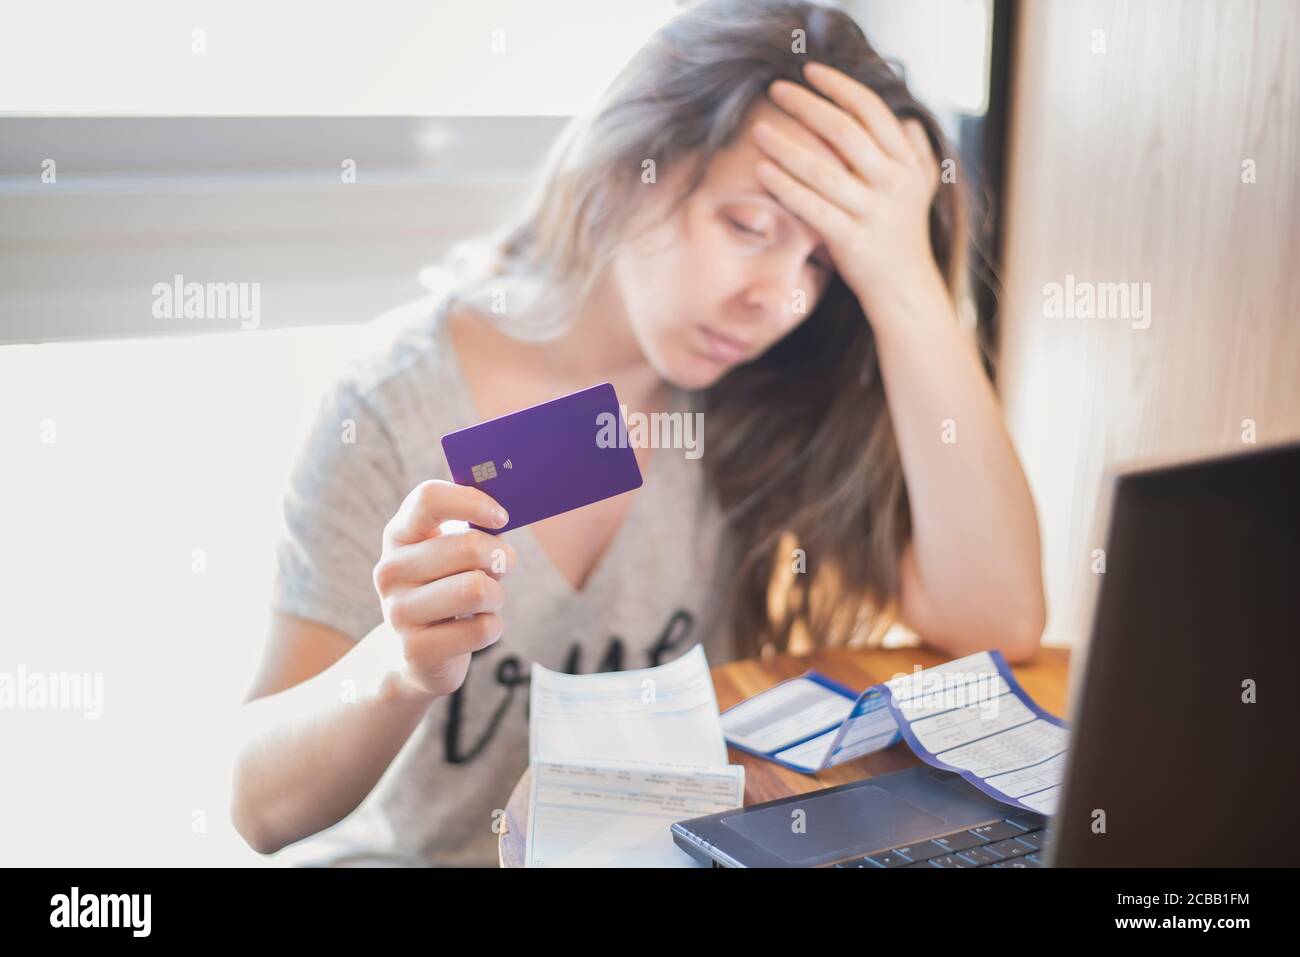 Worried And Desperate woman with bills and credit card Stock Photo